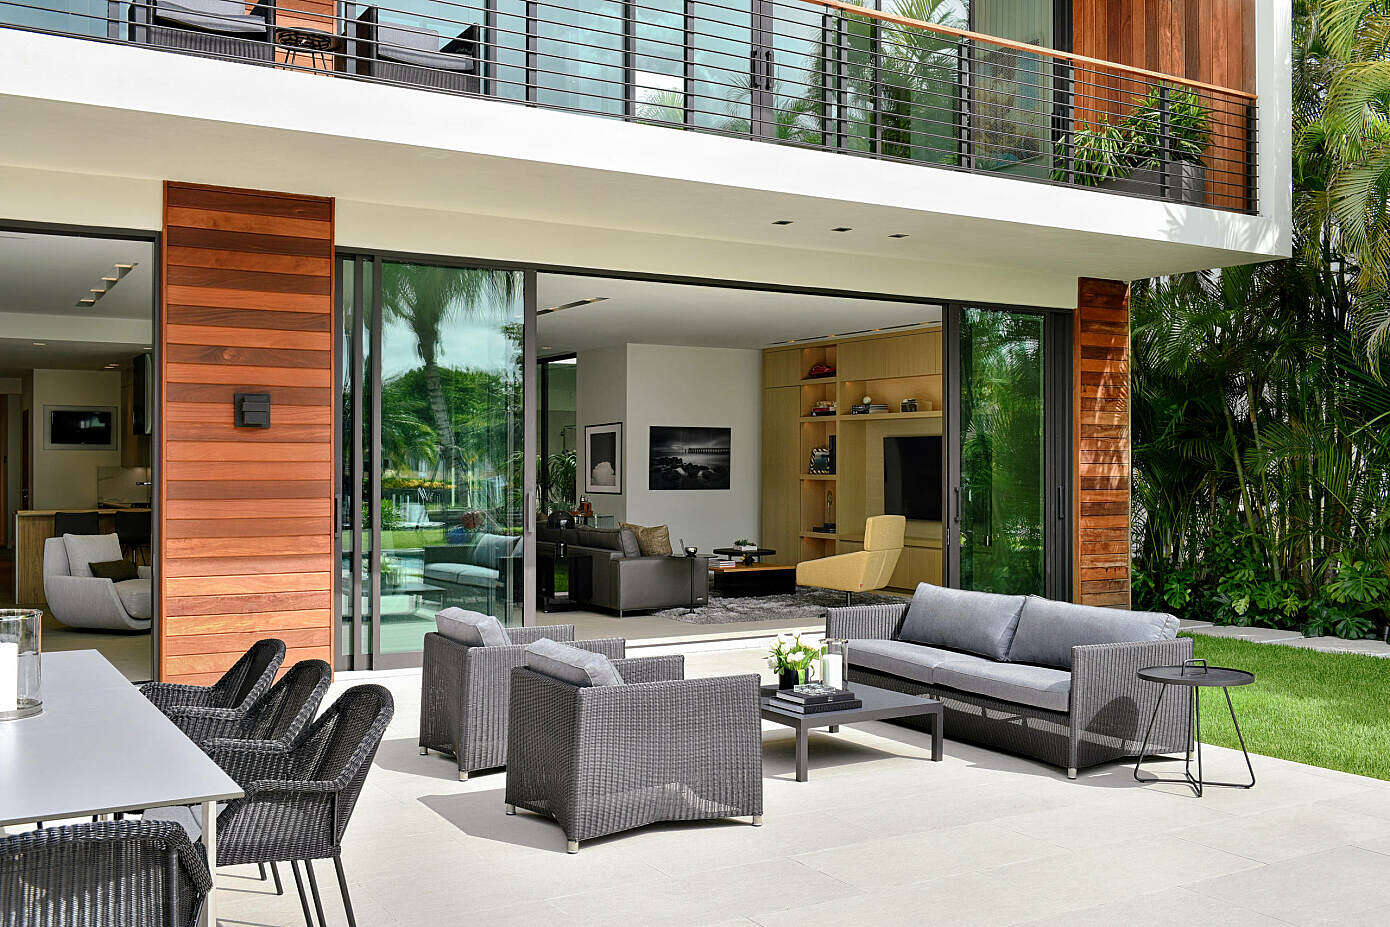 Miami Beach Project by Whitecap Construction